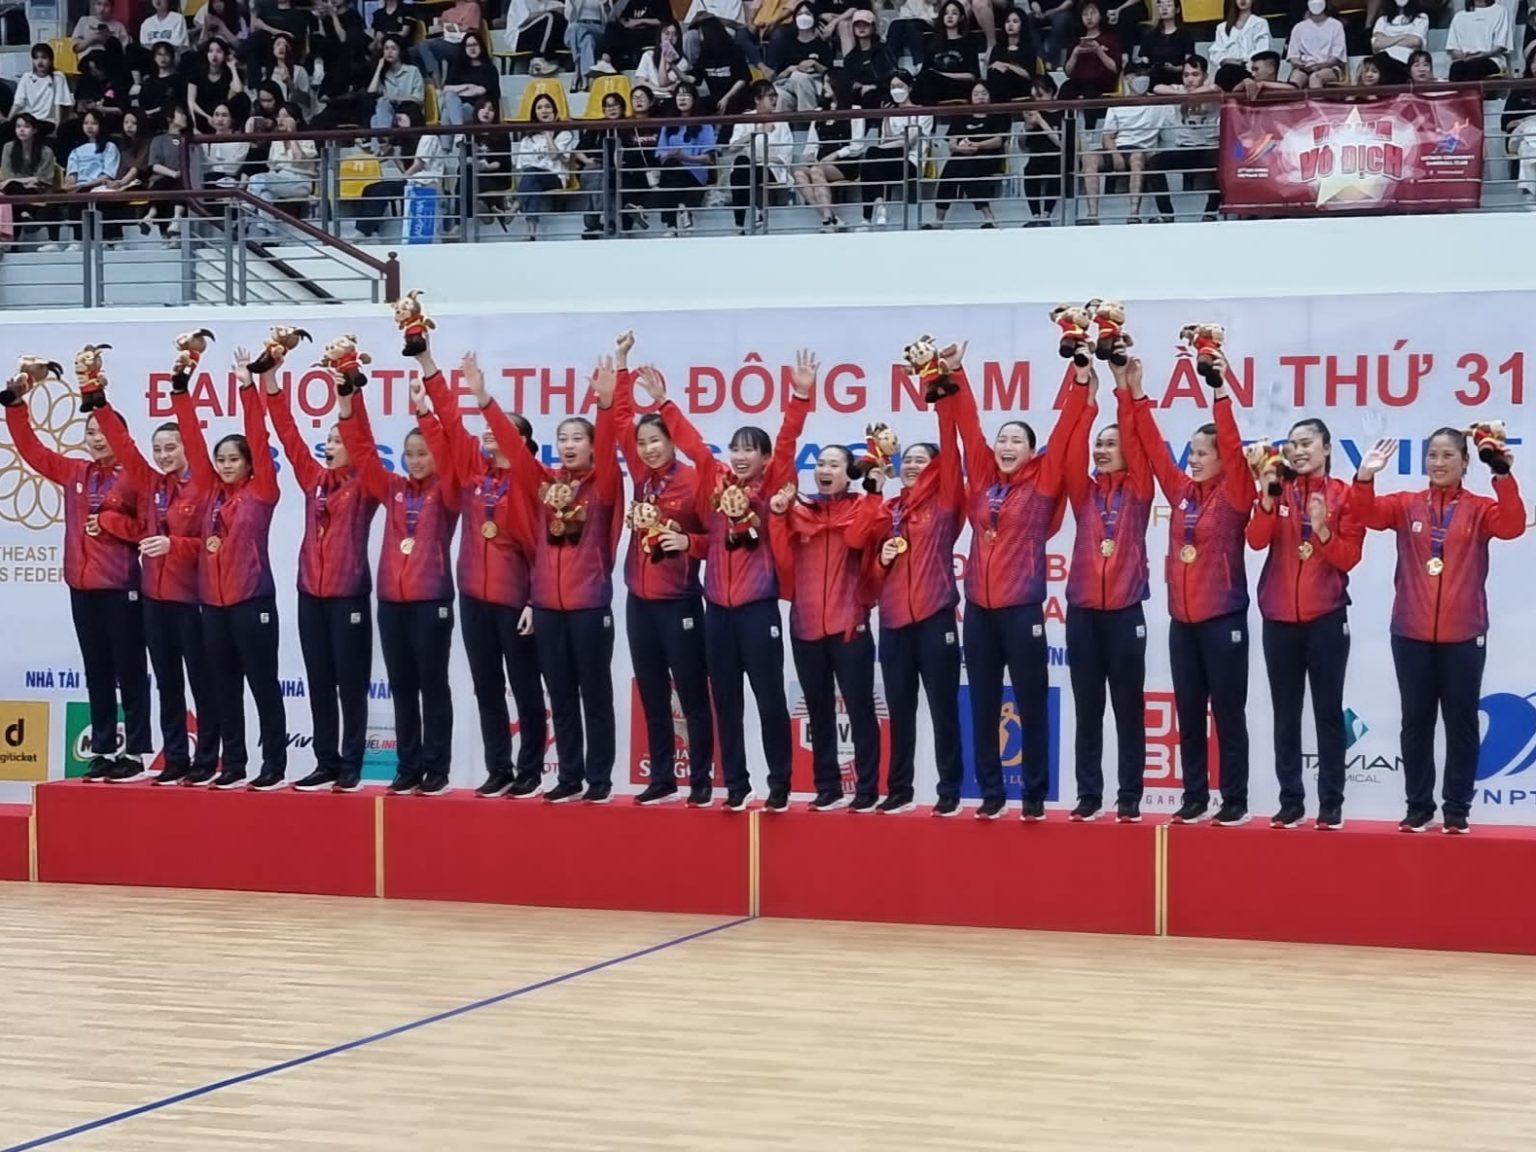 Vietnam won gold medal in the women’s handball event of the 31st